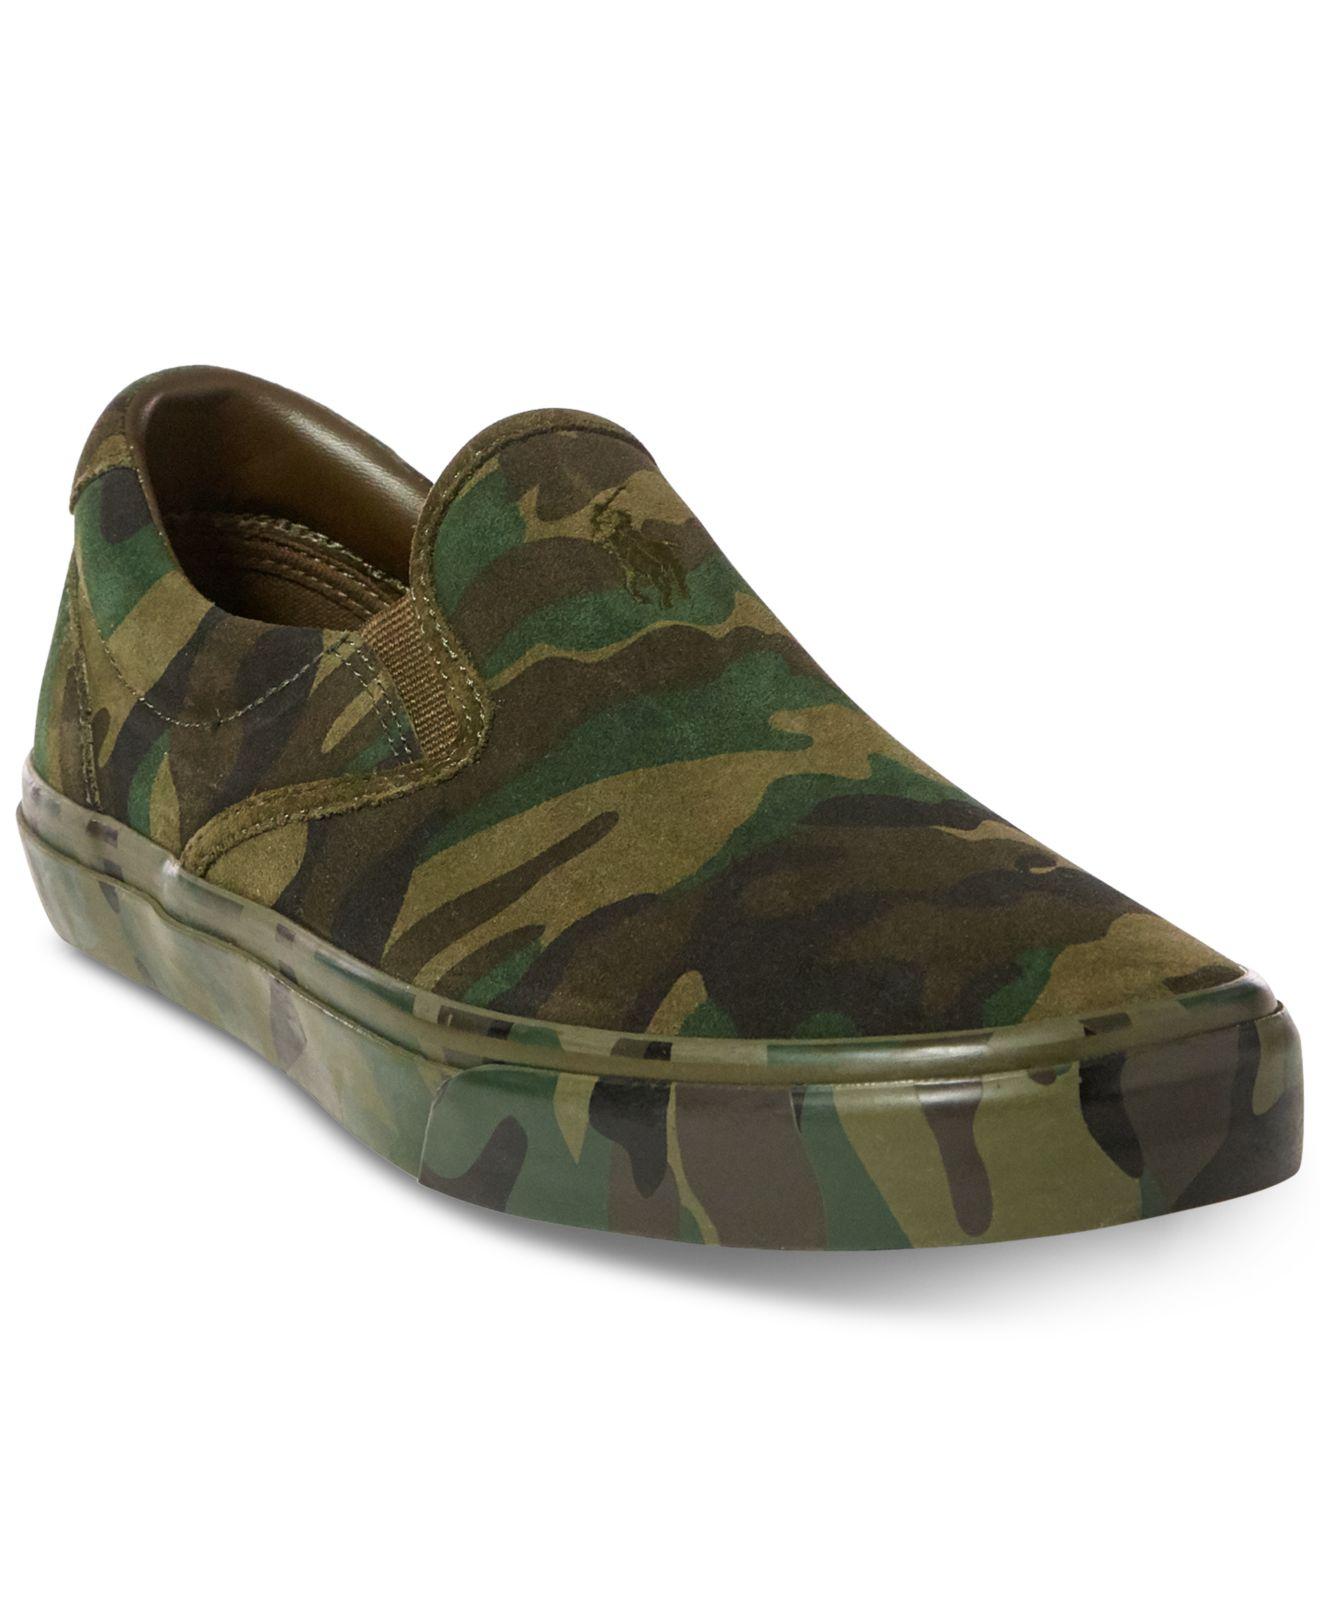 Polo Ralph Lauren Thompson Suede Slip-on Sneakers in Olive Camo (Green ...